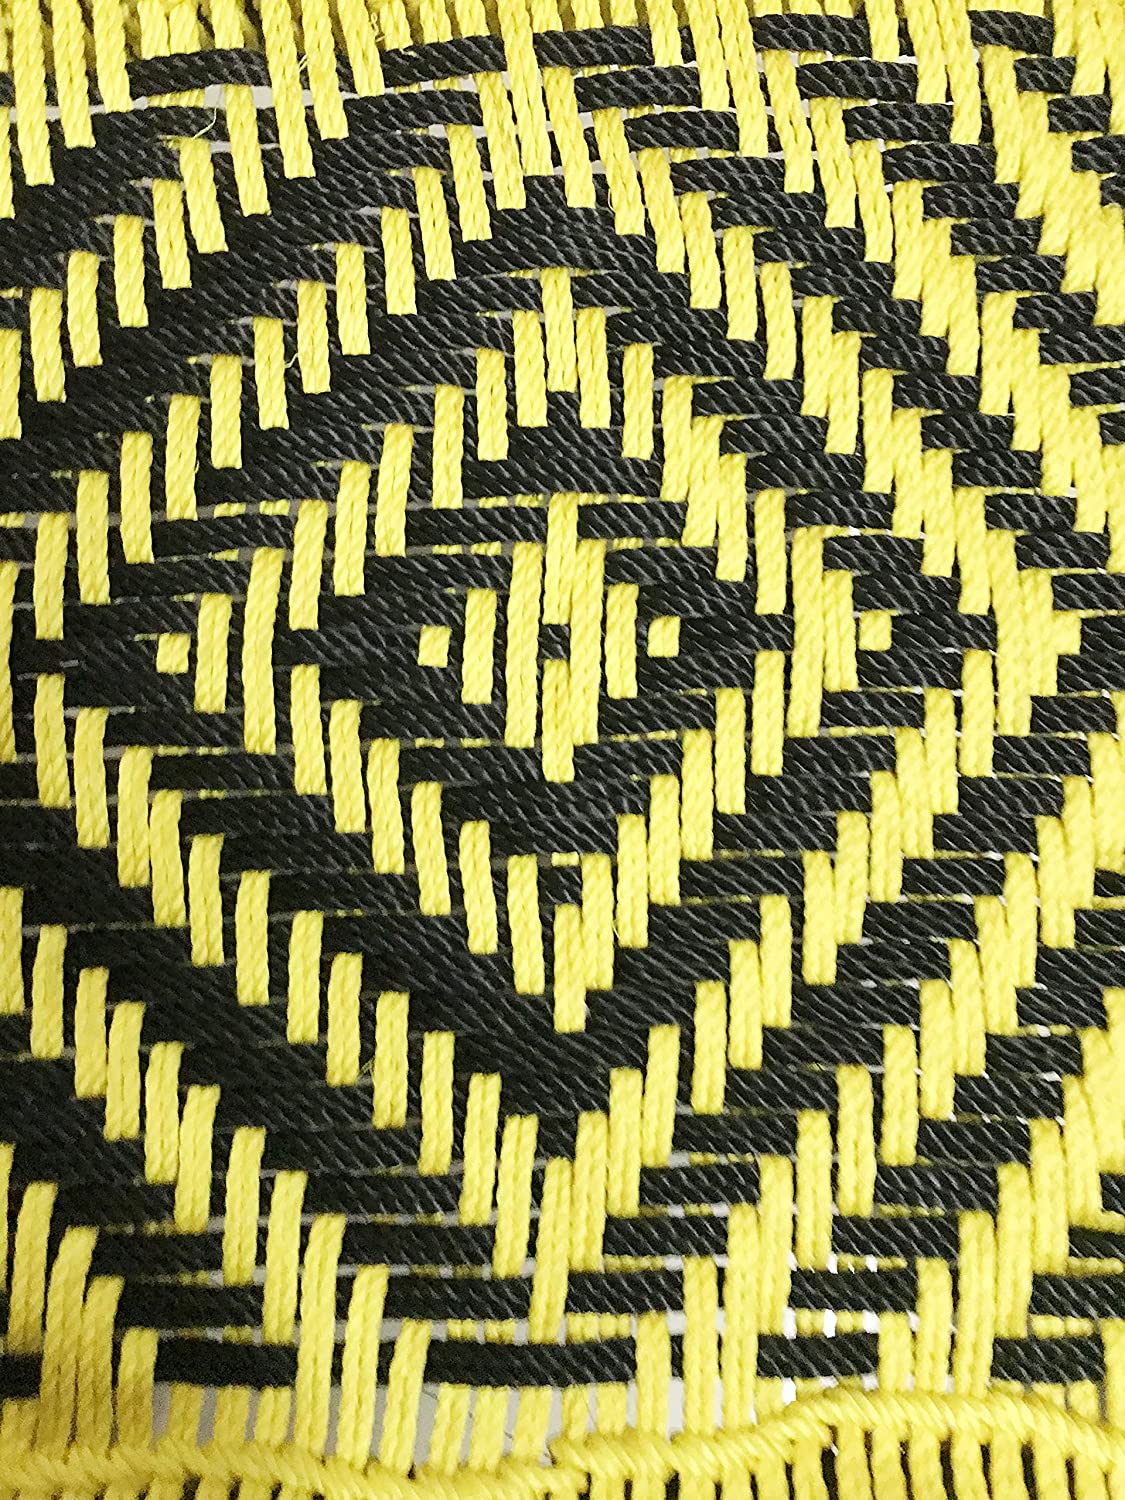 Wooden stool with yellow and black weaving for garden